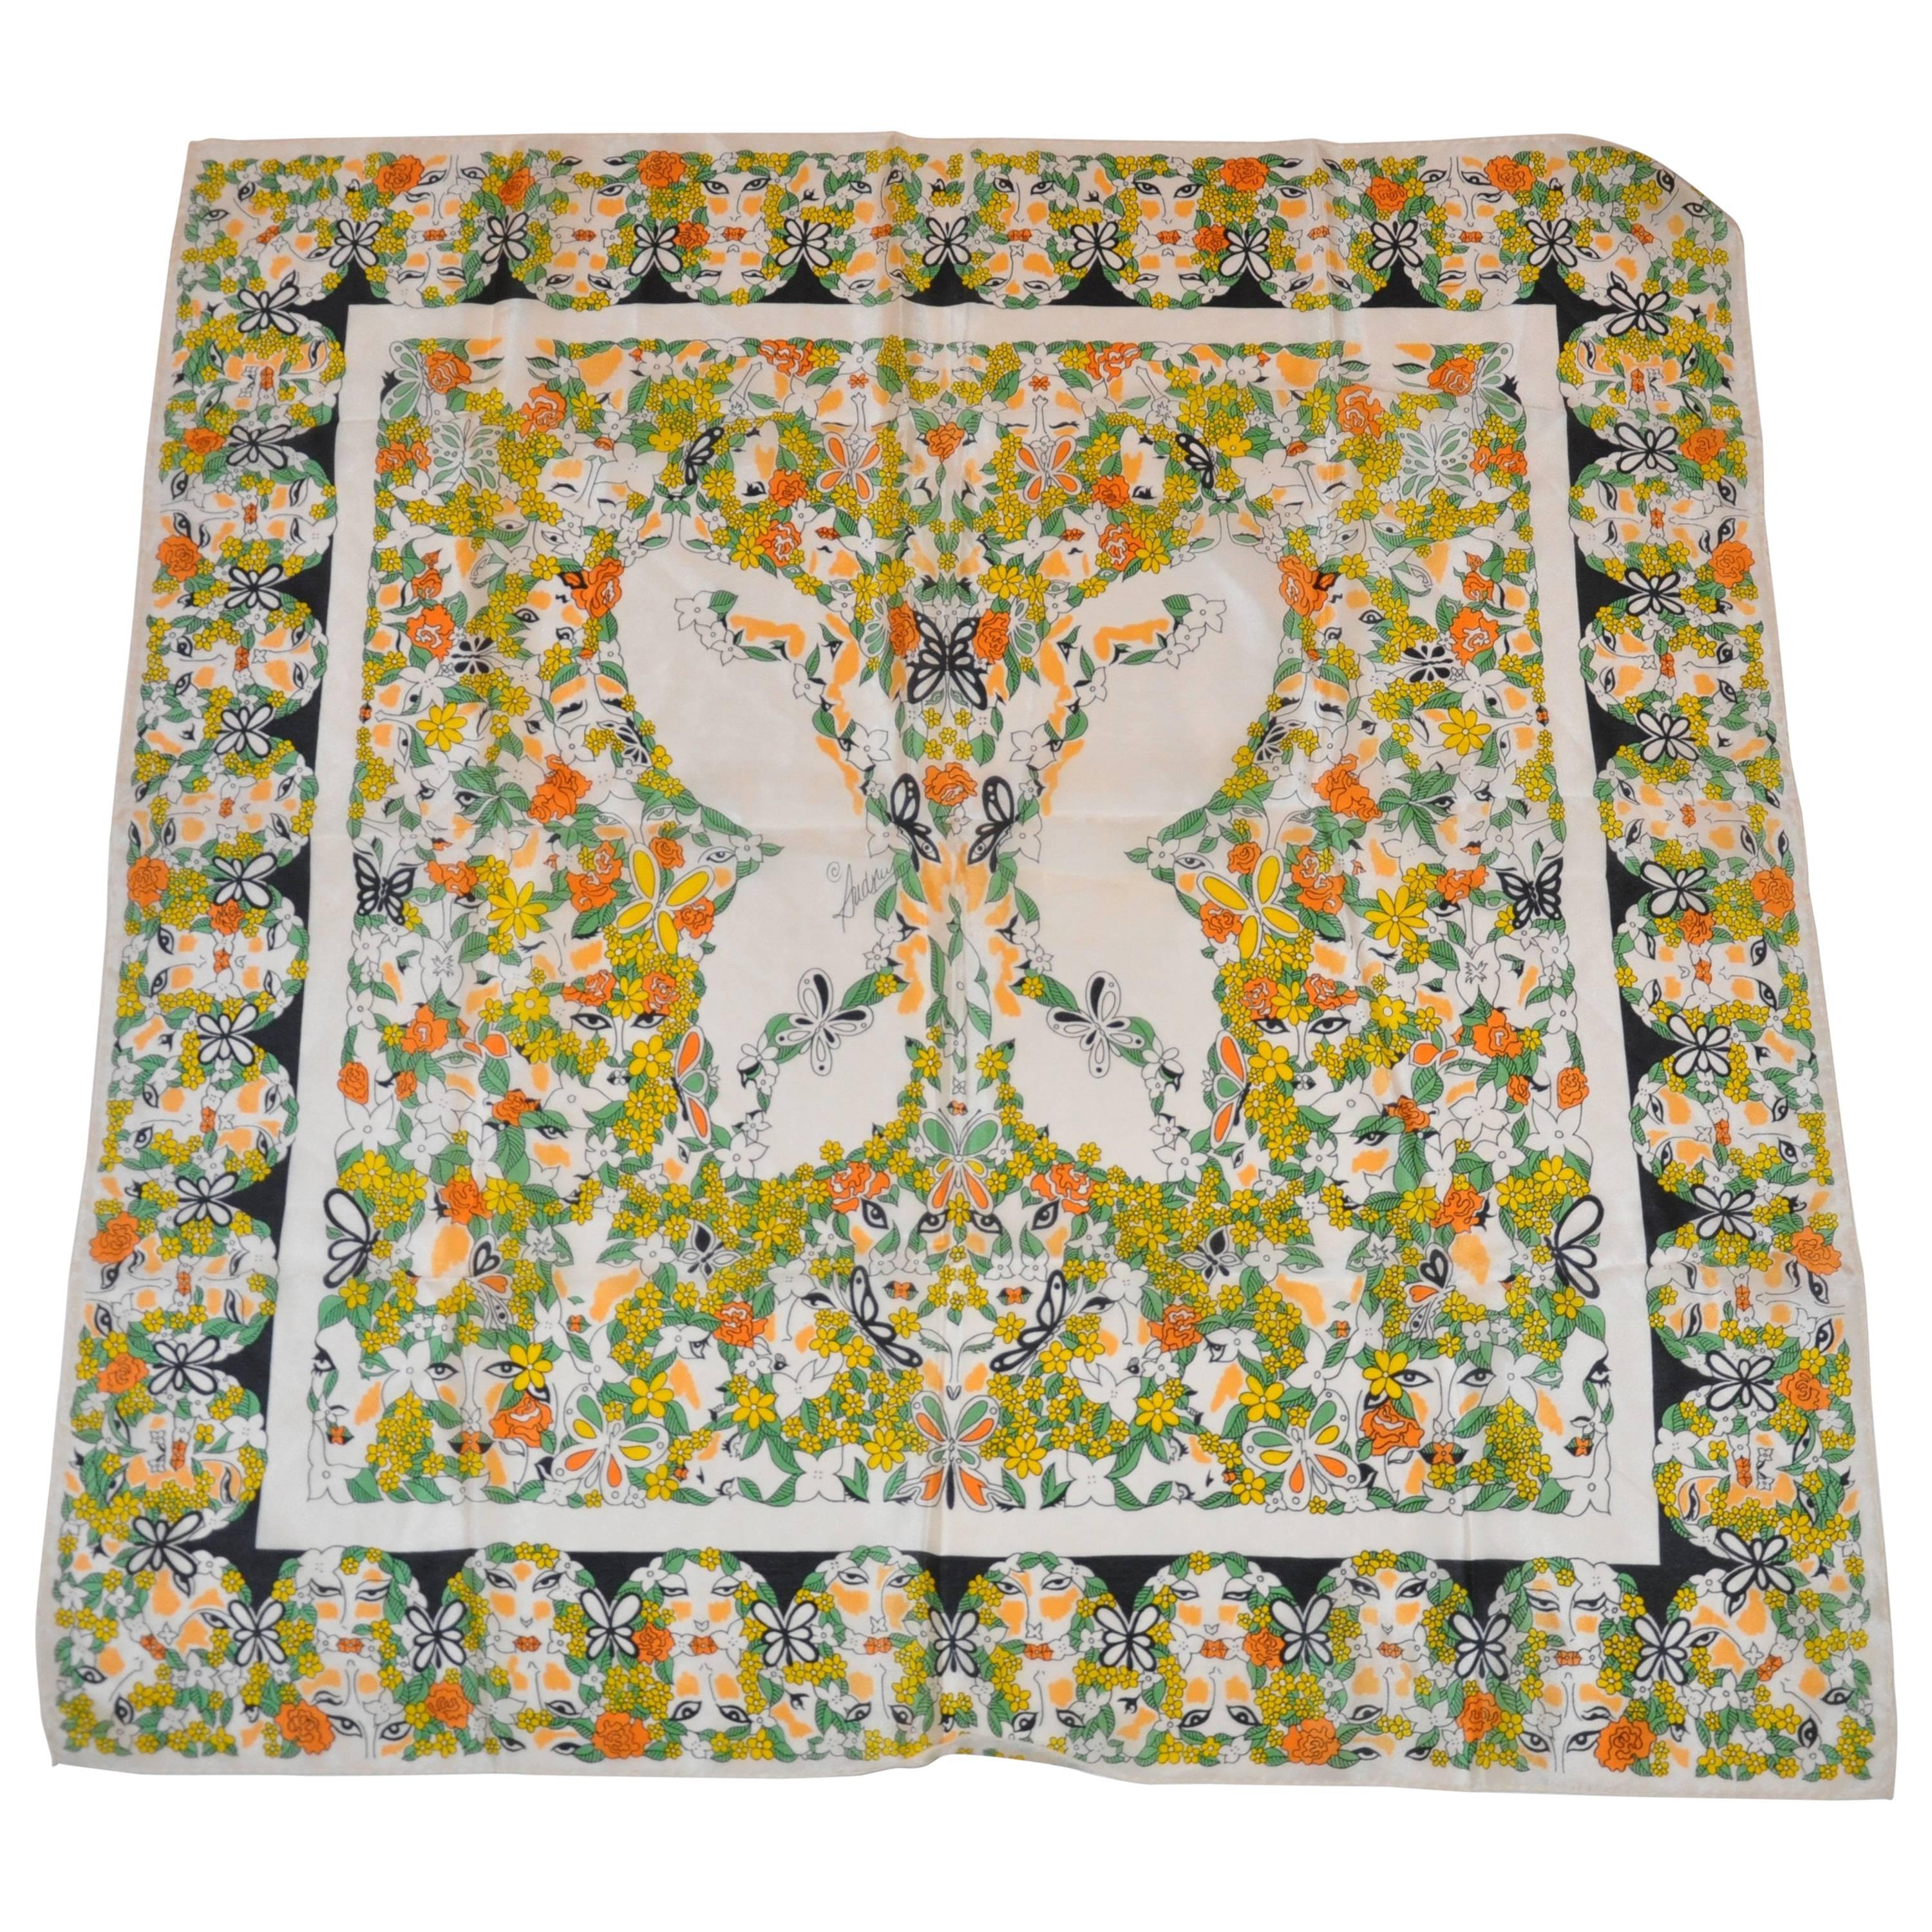 Multi-Color "Ladies Profiles Surrounding Butterfly" Silk Scarf For Sale